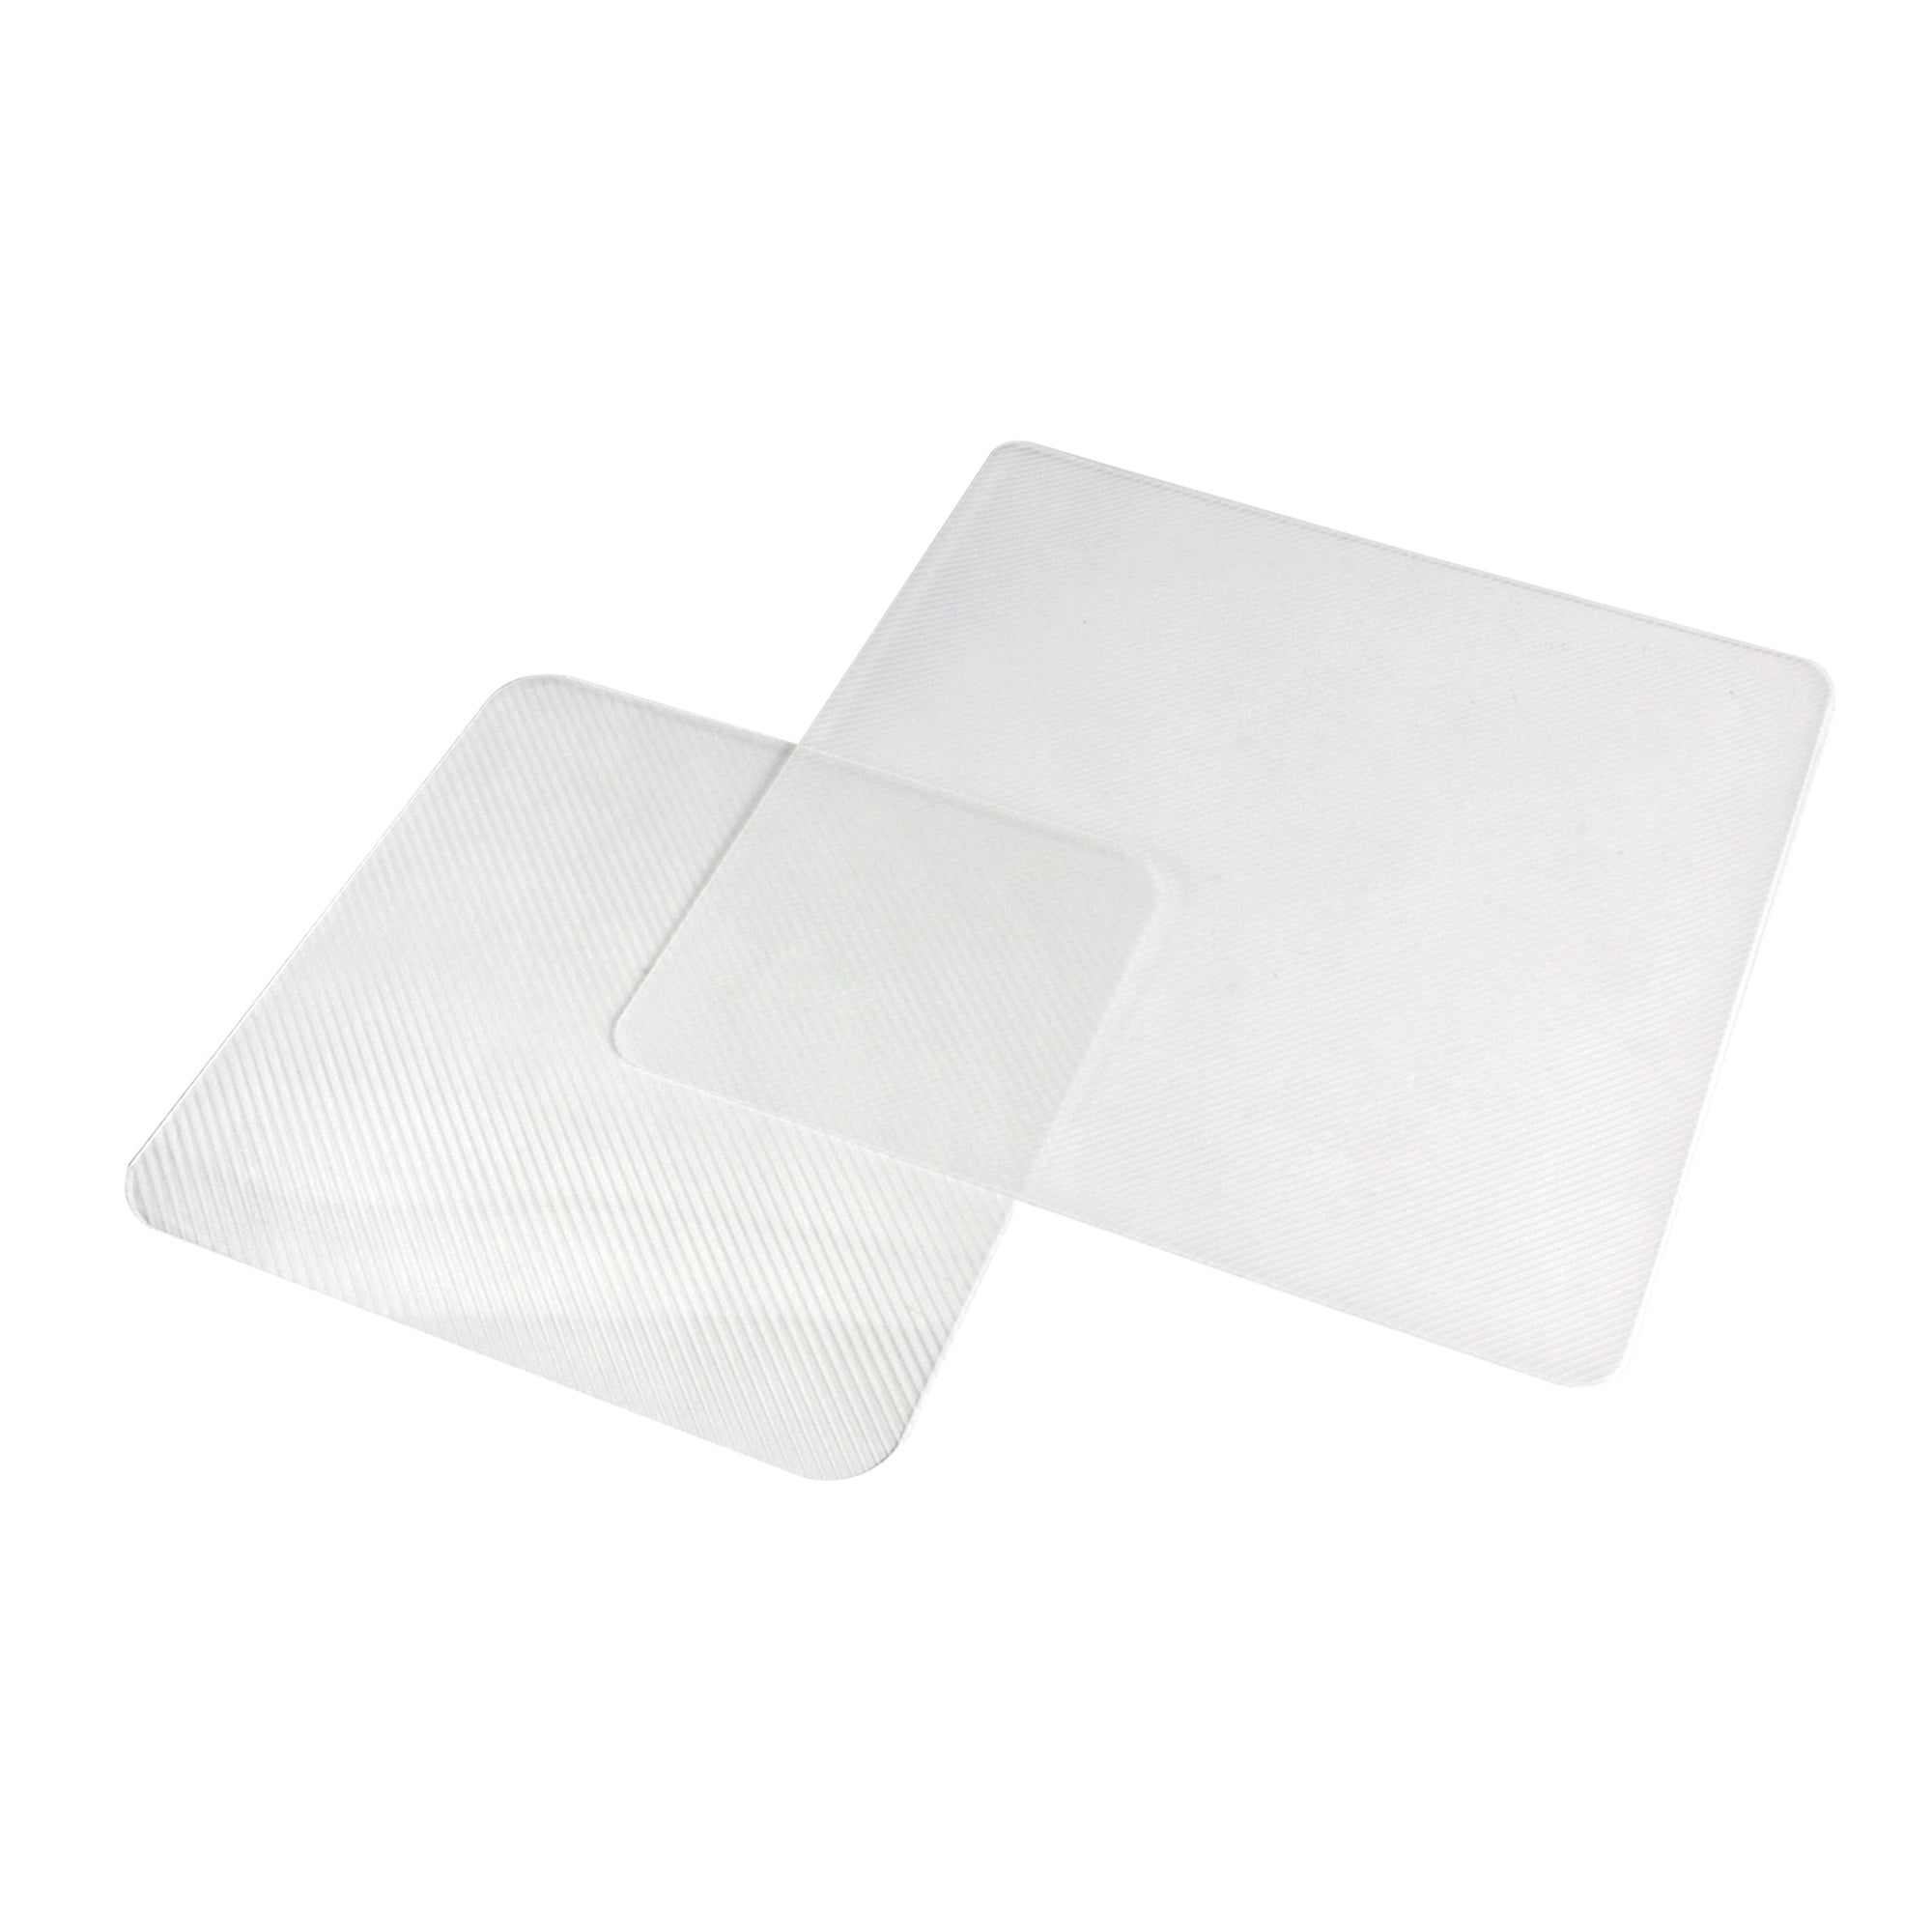 Camco 43790 Microwave Cooking Cover - Pack of 2